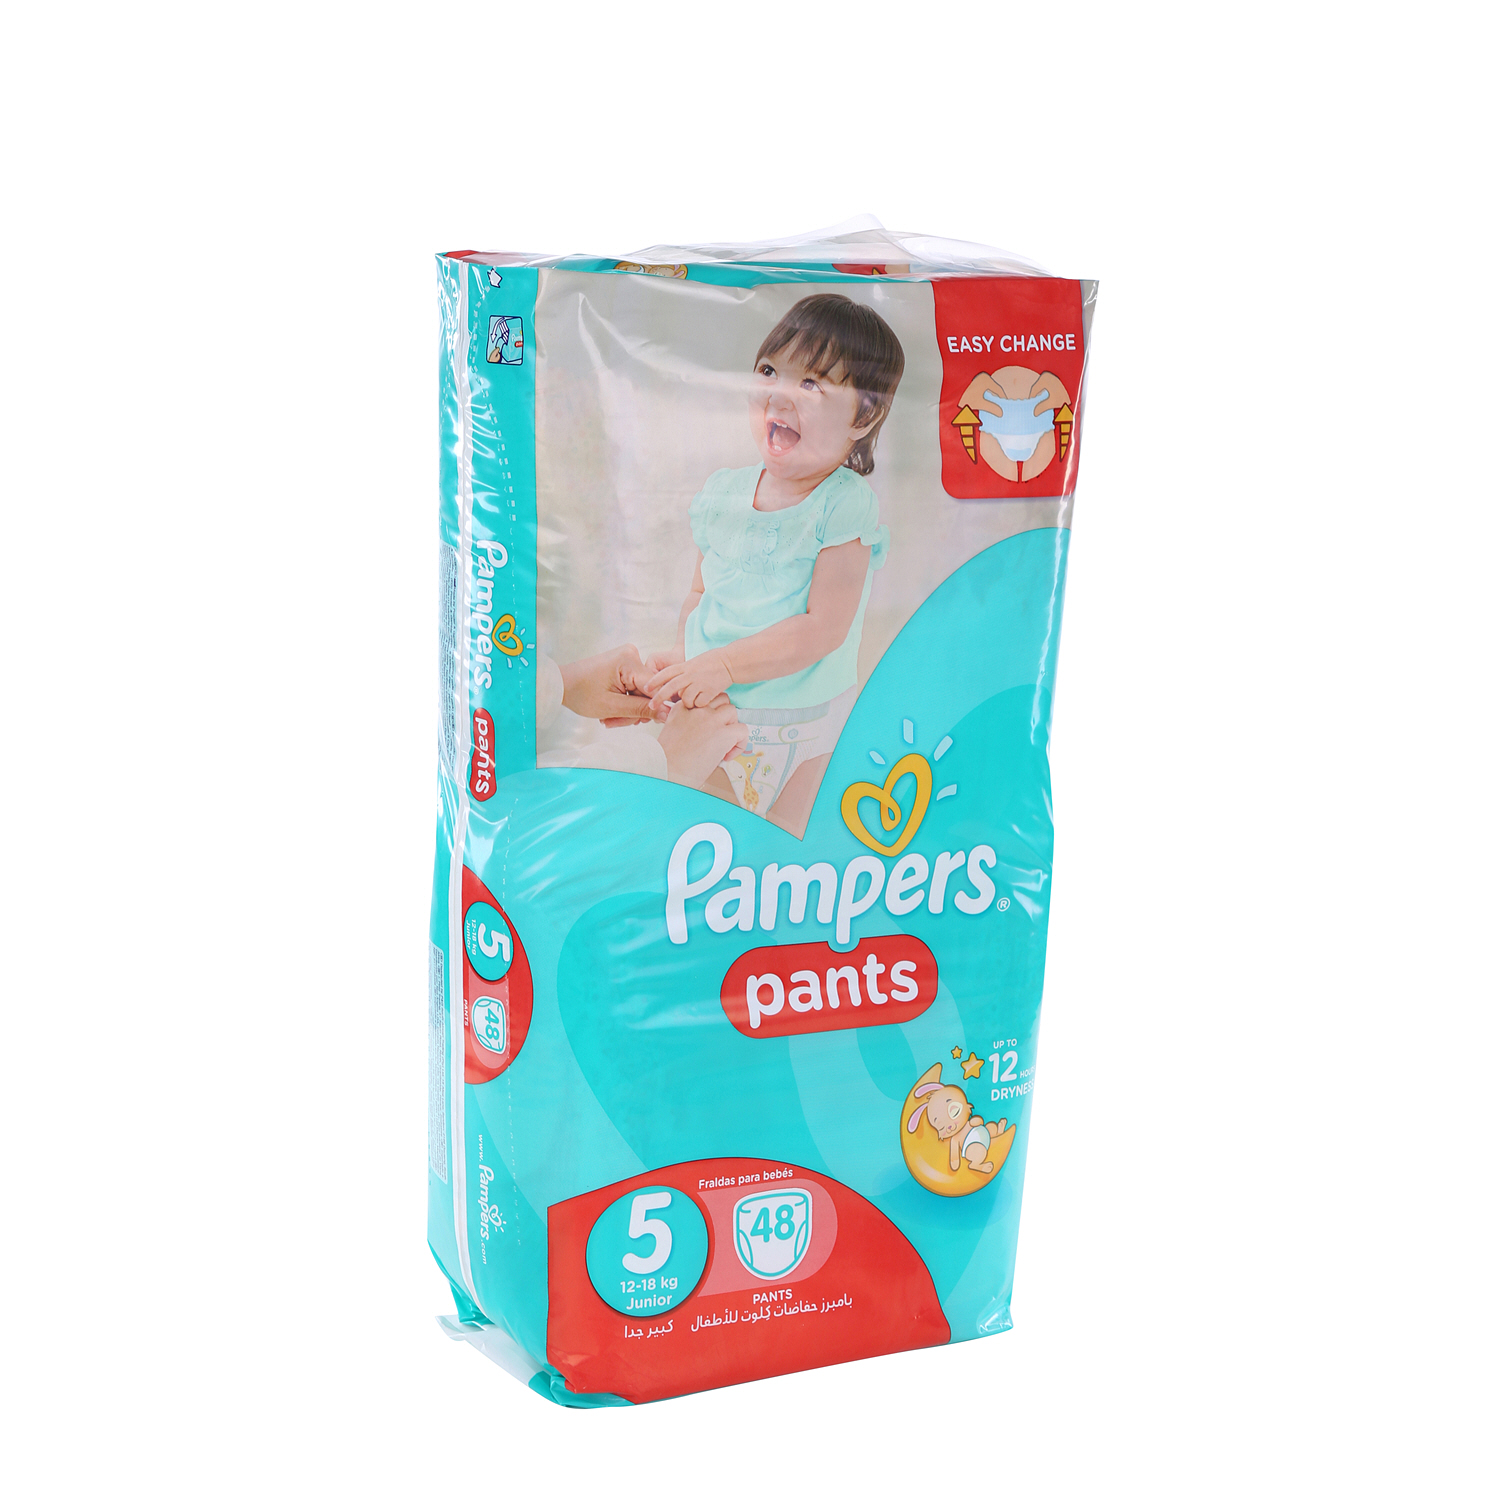 Pampers Pants Size 5 Japanese Pack 48 Pieces